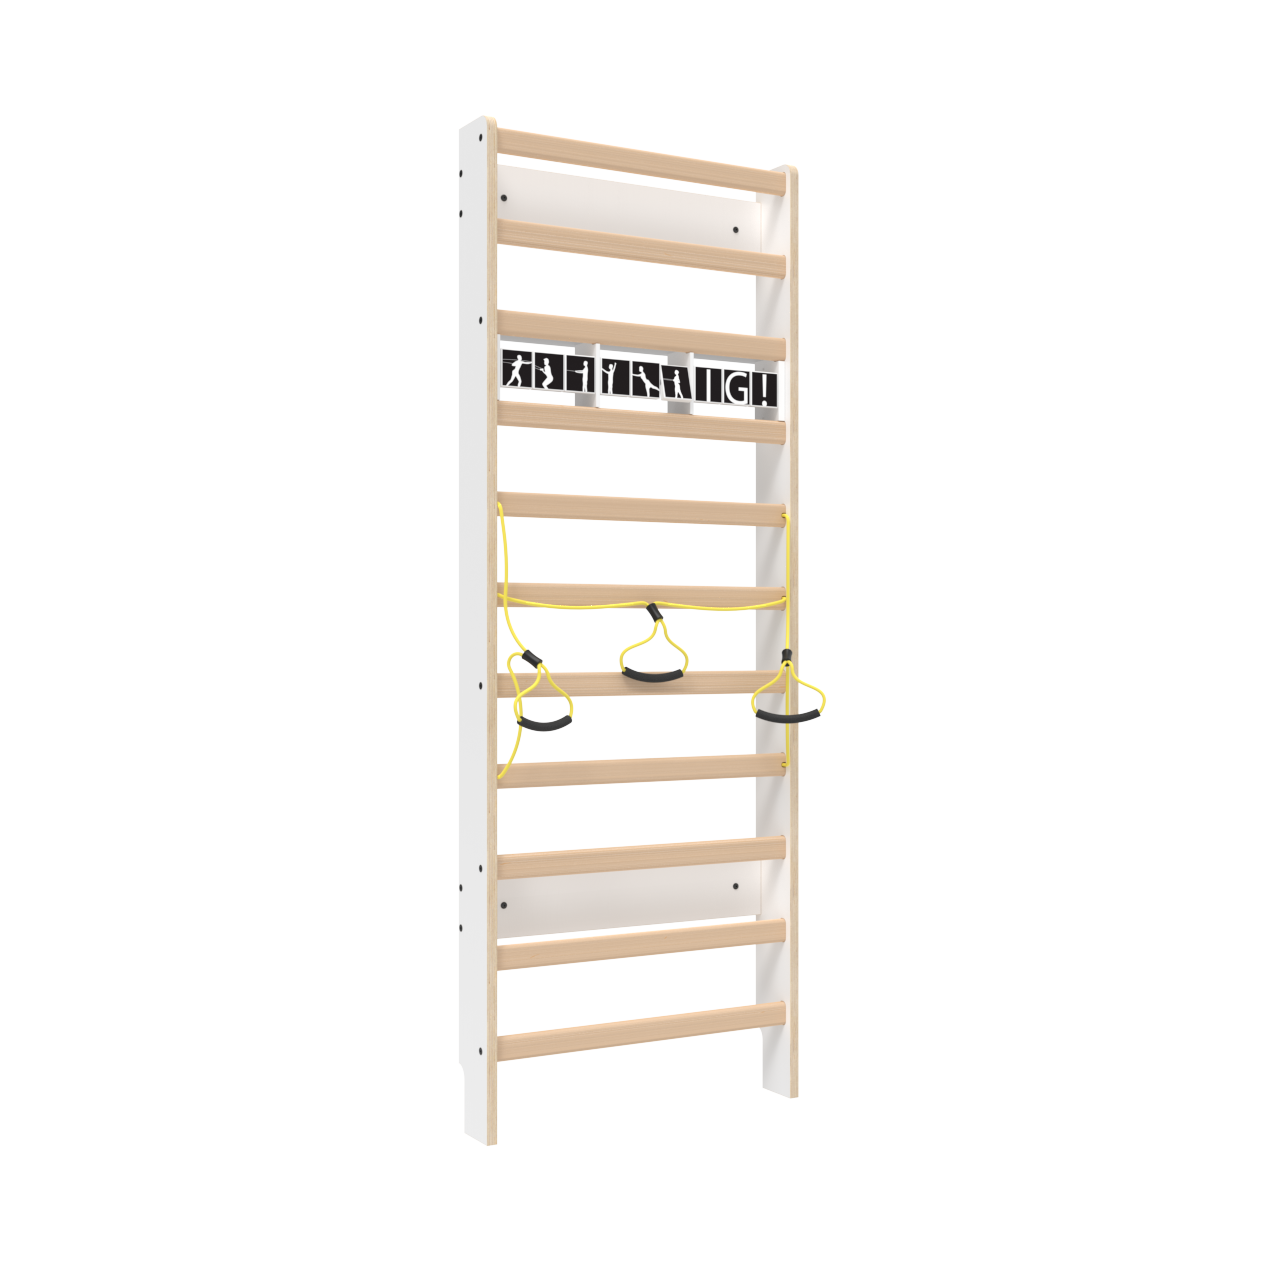 ISC Collection I Wooden play module GYM Swedish Ladder